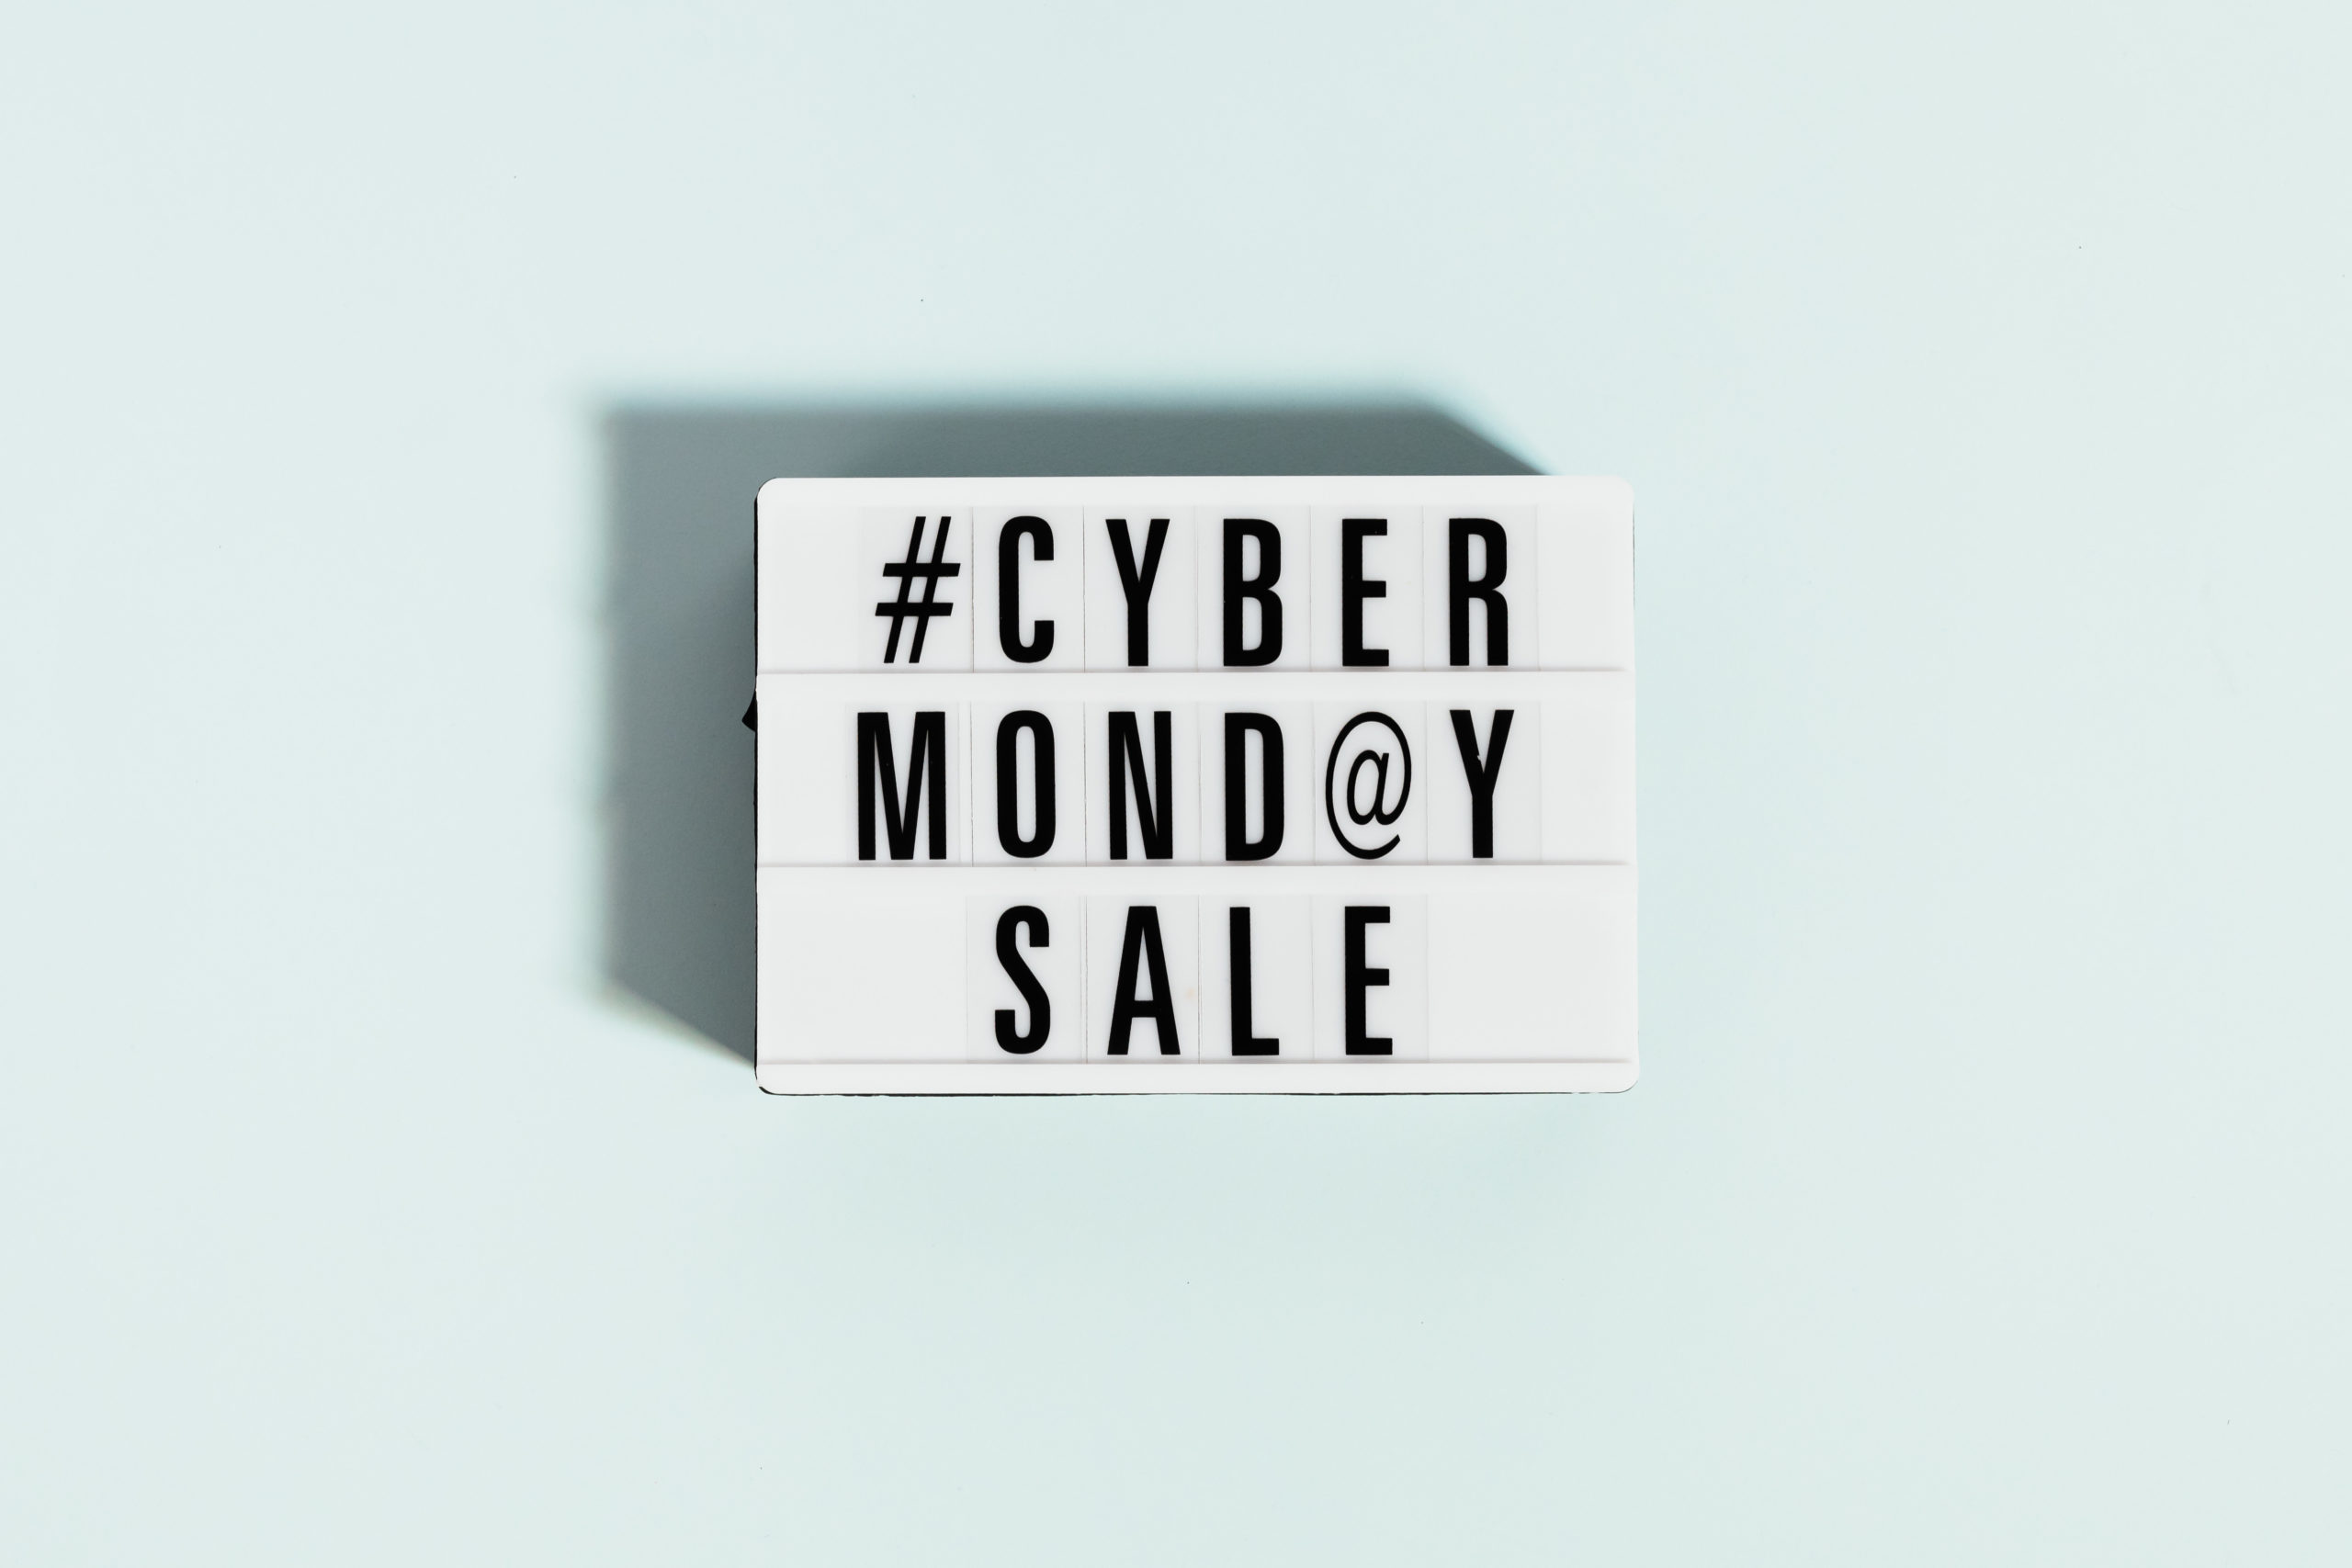 cyber Monday, cyber monday deals for moms, cyber monday 2021, top cyber monday deals for moms, cyber Monday gift deals for moms, cyber Monday baby deals, cyber Monday amazon deals, cyber Monday clothing deals, cyber Monday tech deals, cyber Monday baby gear, breast pump deals, planners, smartwatch, massage gun, massager, earth mama, postpartum recovery products, postpartum, baby carrier, ergoBaby omni 360 baby carrier, stroller, baby monitor, ErgoBaby, cloth diapers, baby bottle, baby feeding, willow pump, fire HD tablet, robot vacuum cleaner, echo dot, movie projector, apple MacBook Air, Google Pixelbook, Apple TV, Telescope, Air Fryer, Echo Show, Ring Video Doorbell, Google Nest, Home security alarm system, matching family Christmas pajamas, cyber Monday shopping